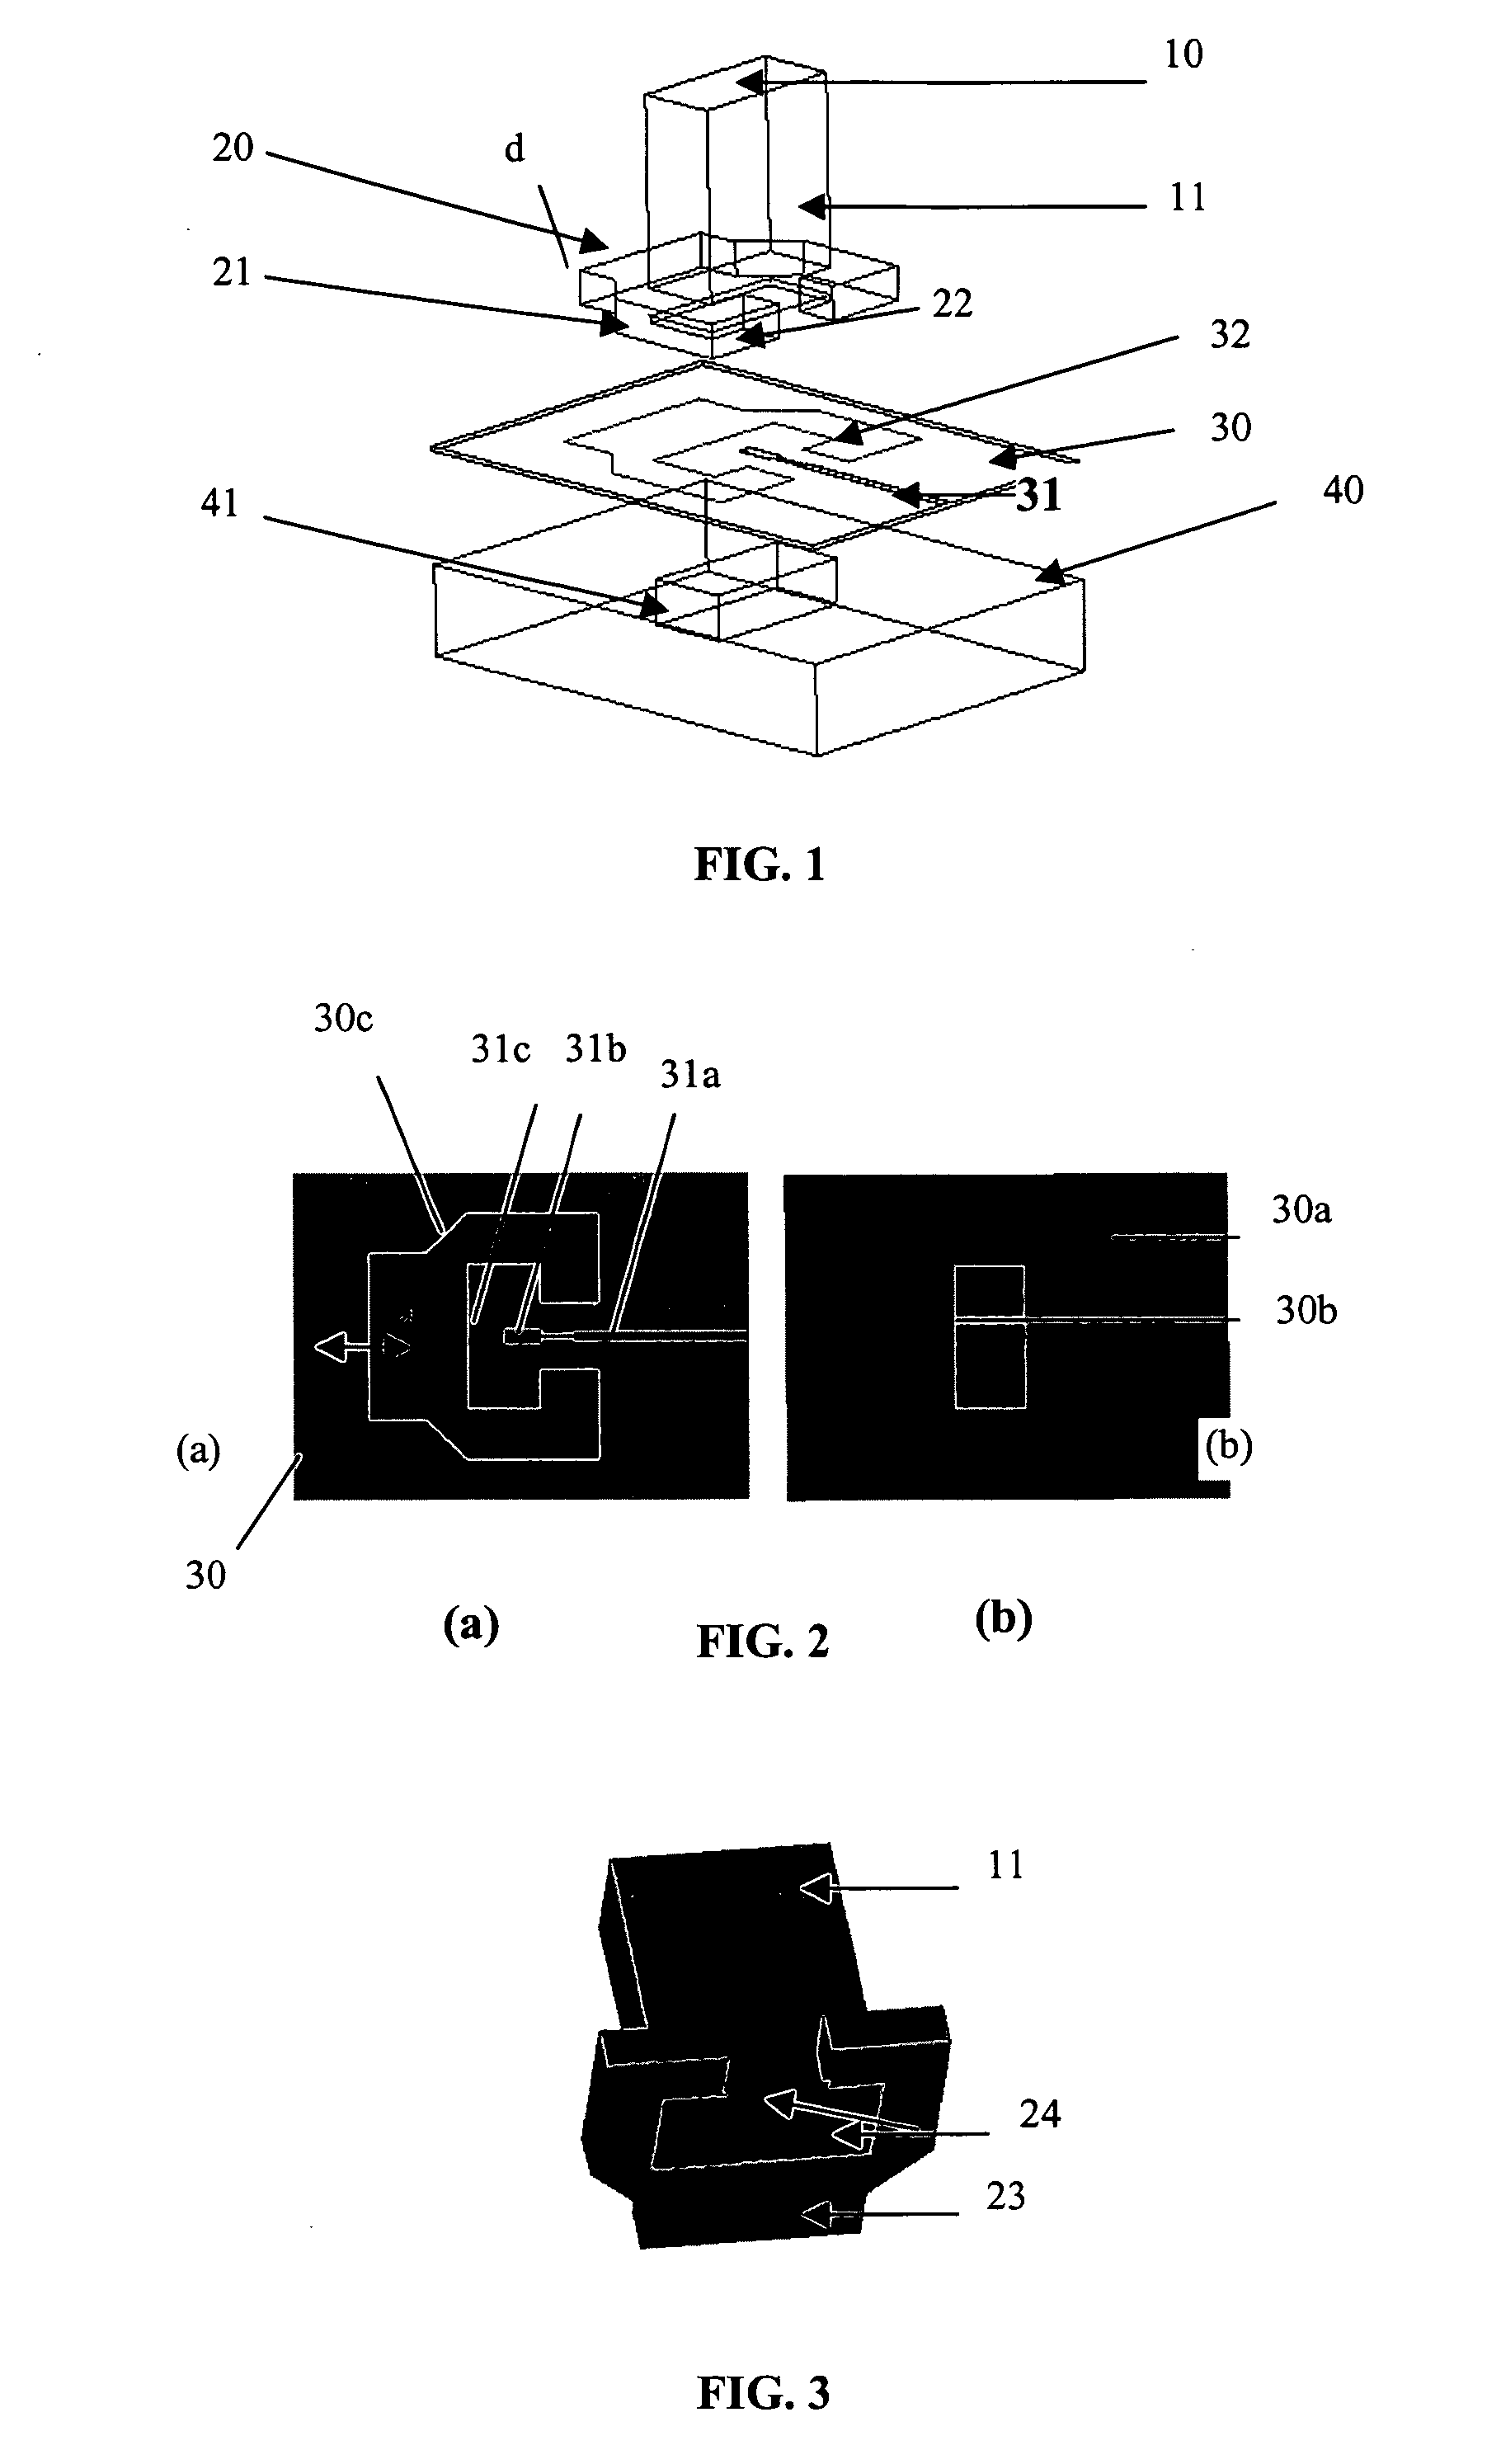 Contact-free element of transition between a waveguide and a microstrip line